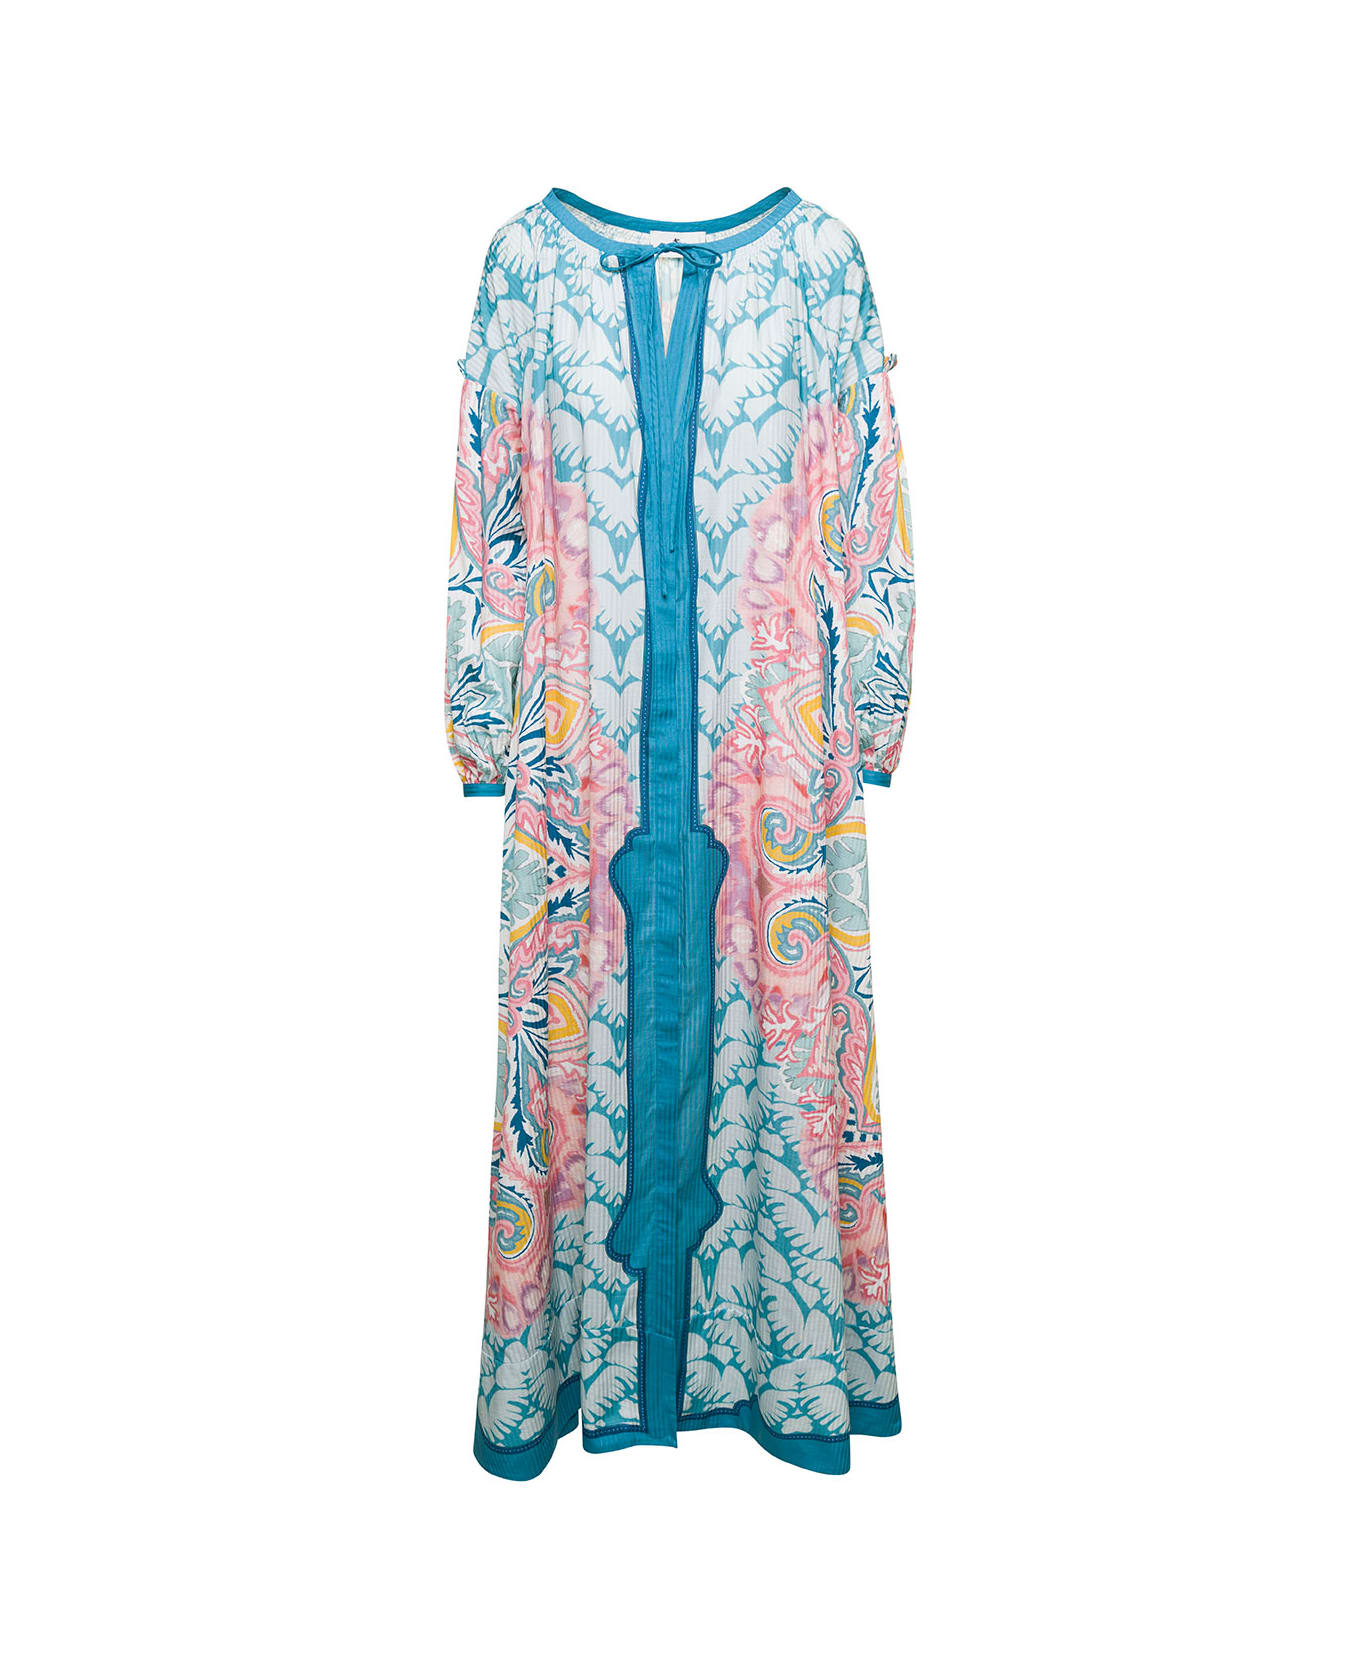 Etro Pink And Liht-blue Paisley Maxi-dress In Cotton Blend Woman - Multicolor